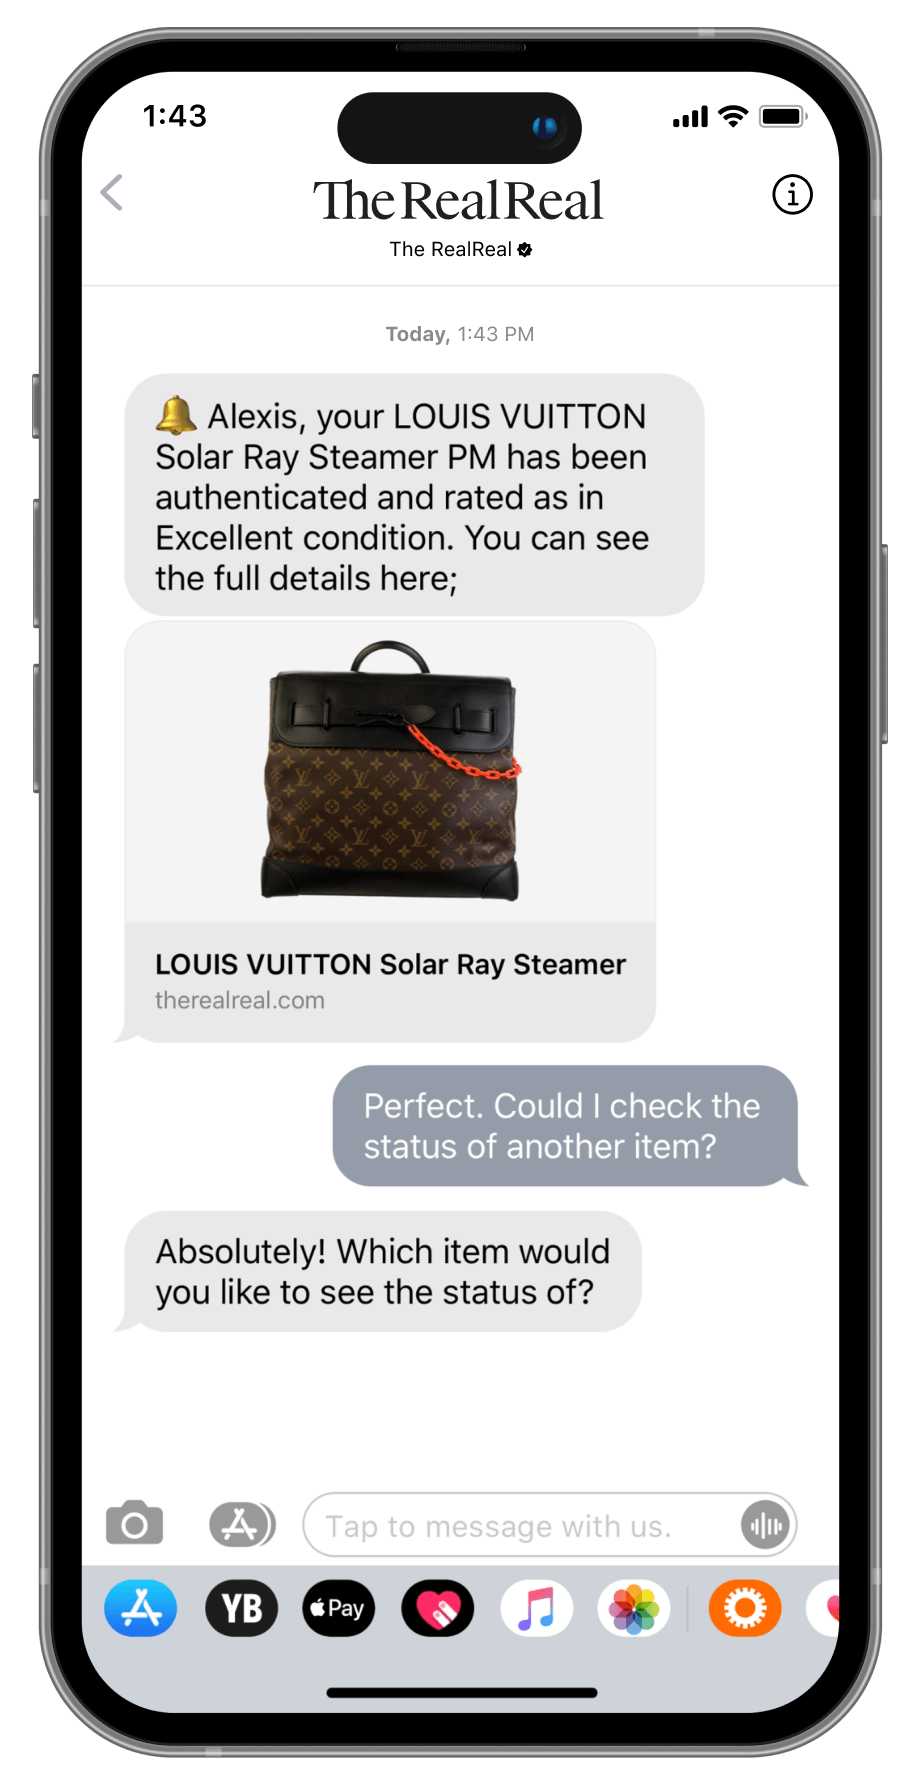 Example of a great digital customer experience via AI chatbot messaging, helping a consignor check item status